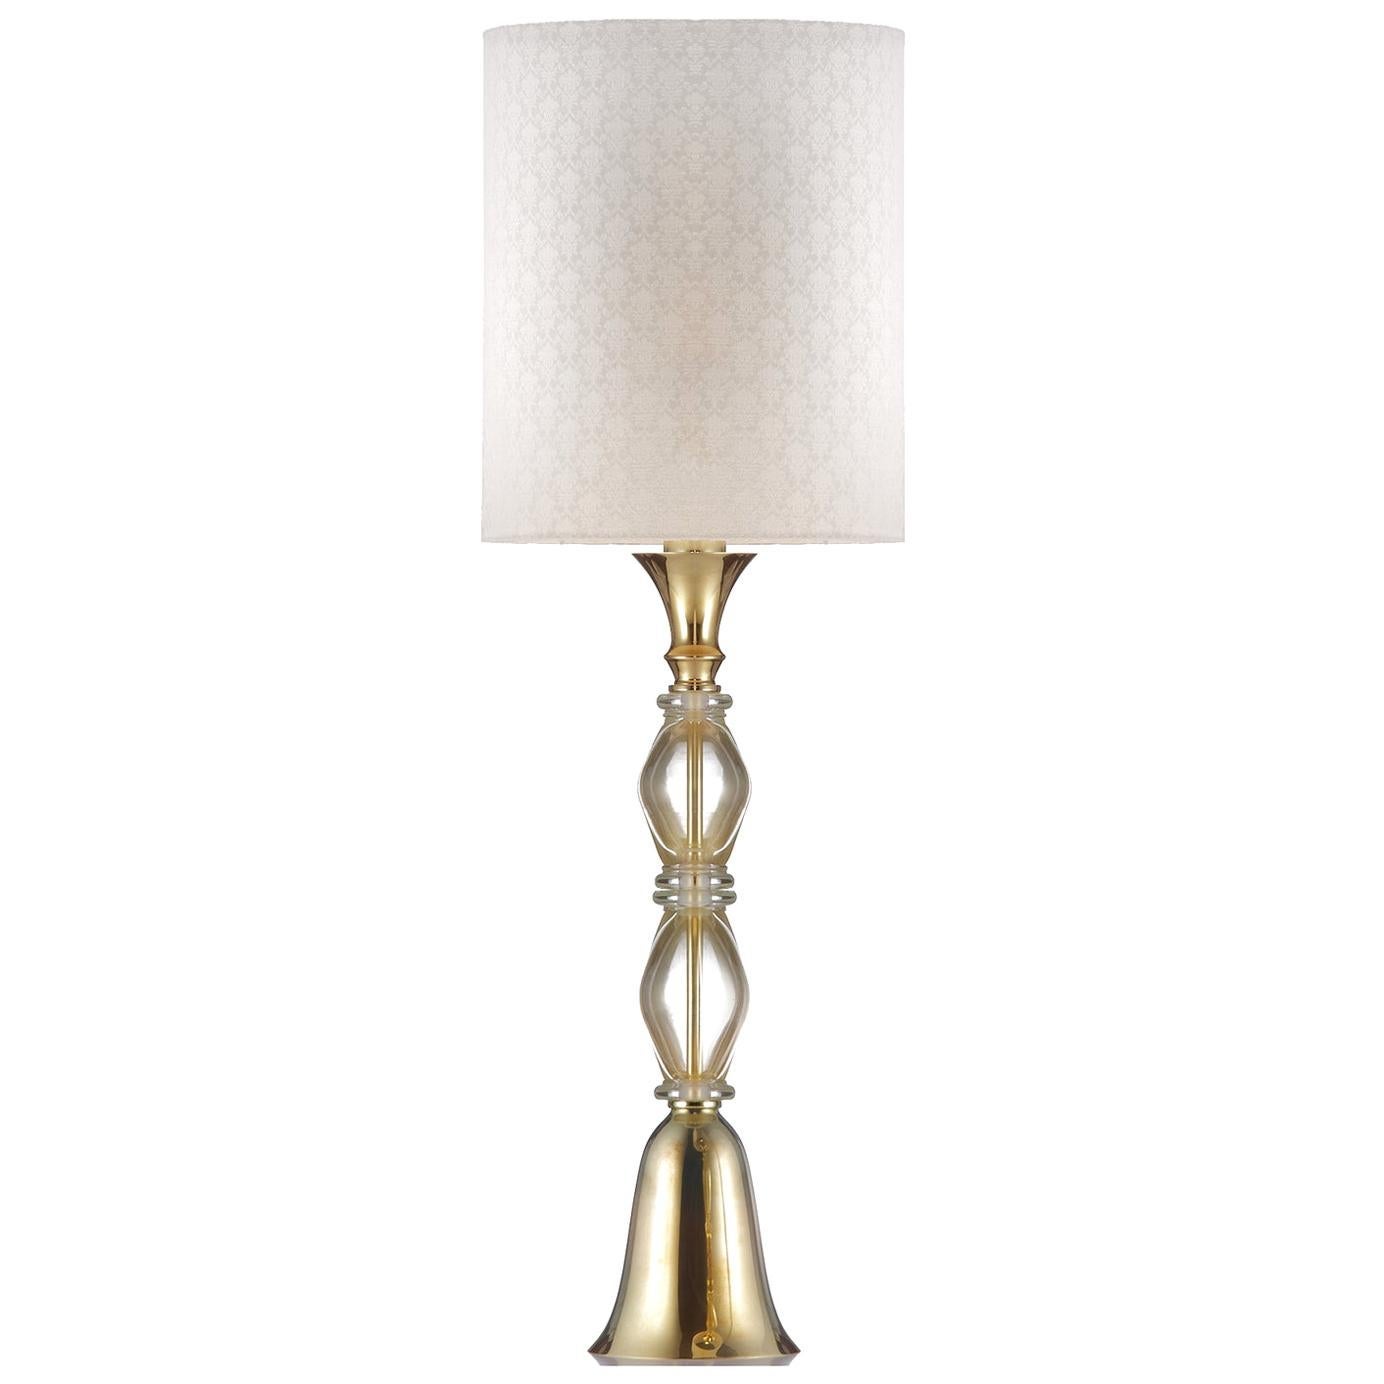 G-Gold Murano Large Table Lamp For Sale